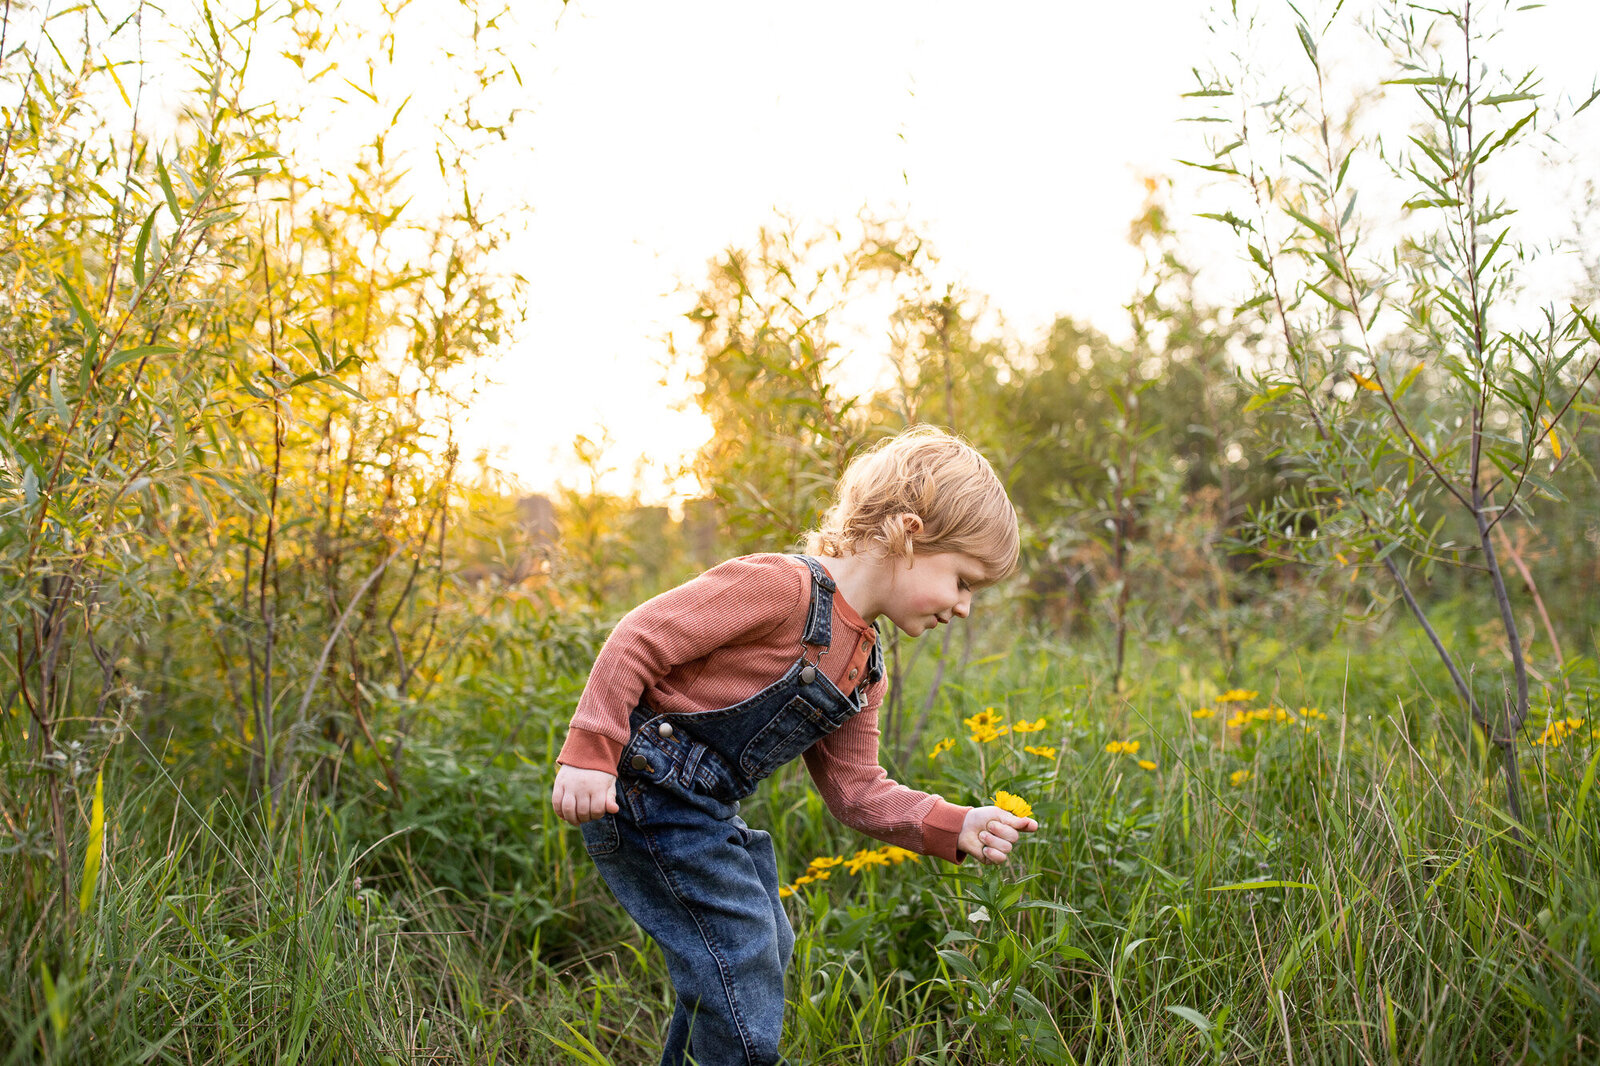 Young boy in overalls picking yellow flowers in the Columbia River Gorge.